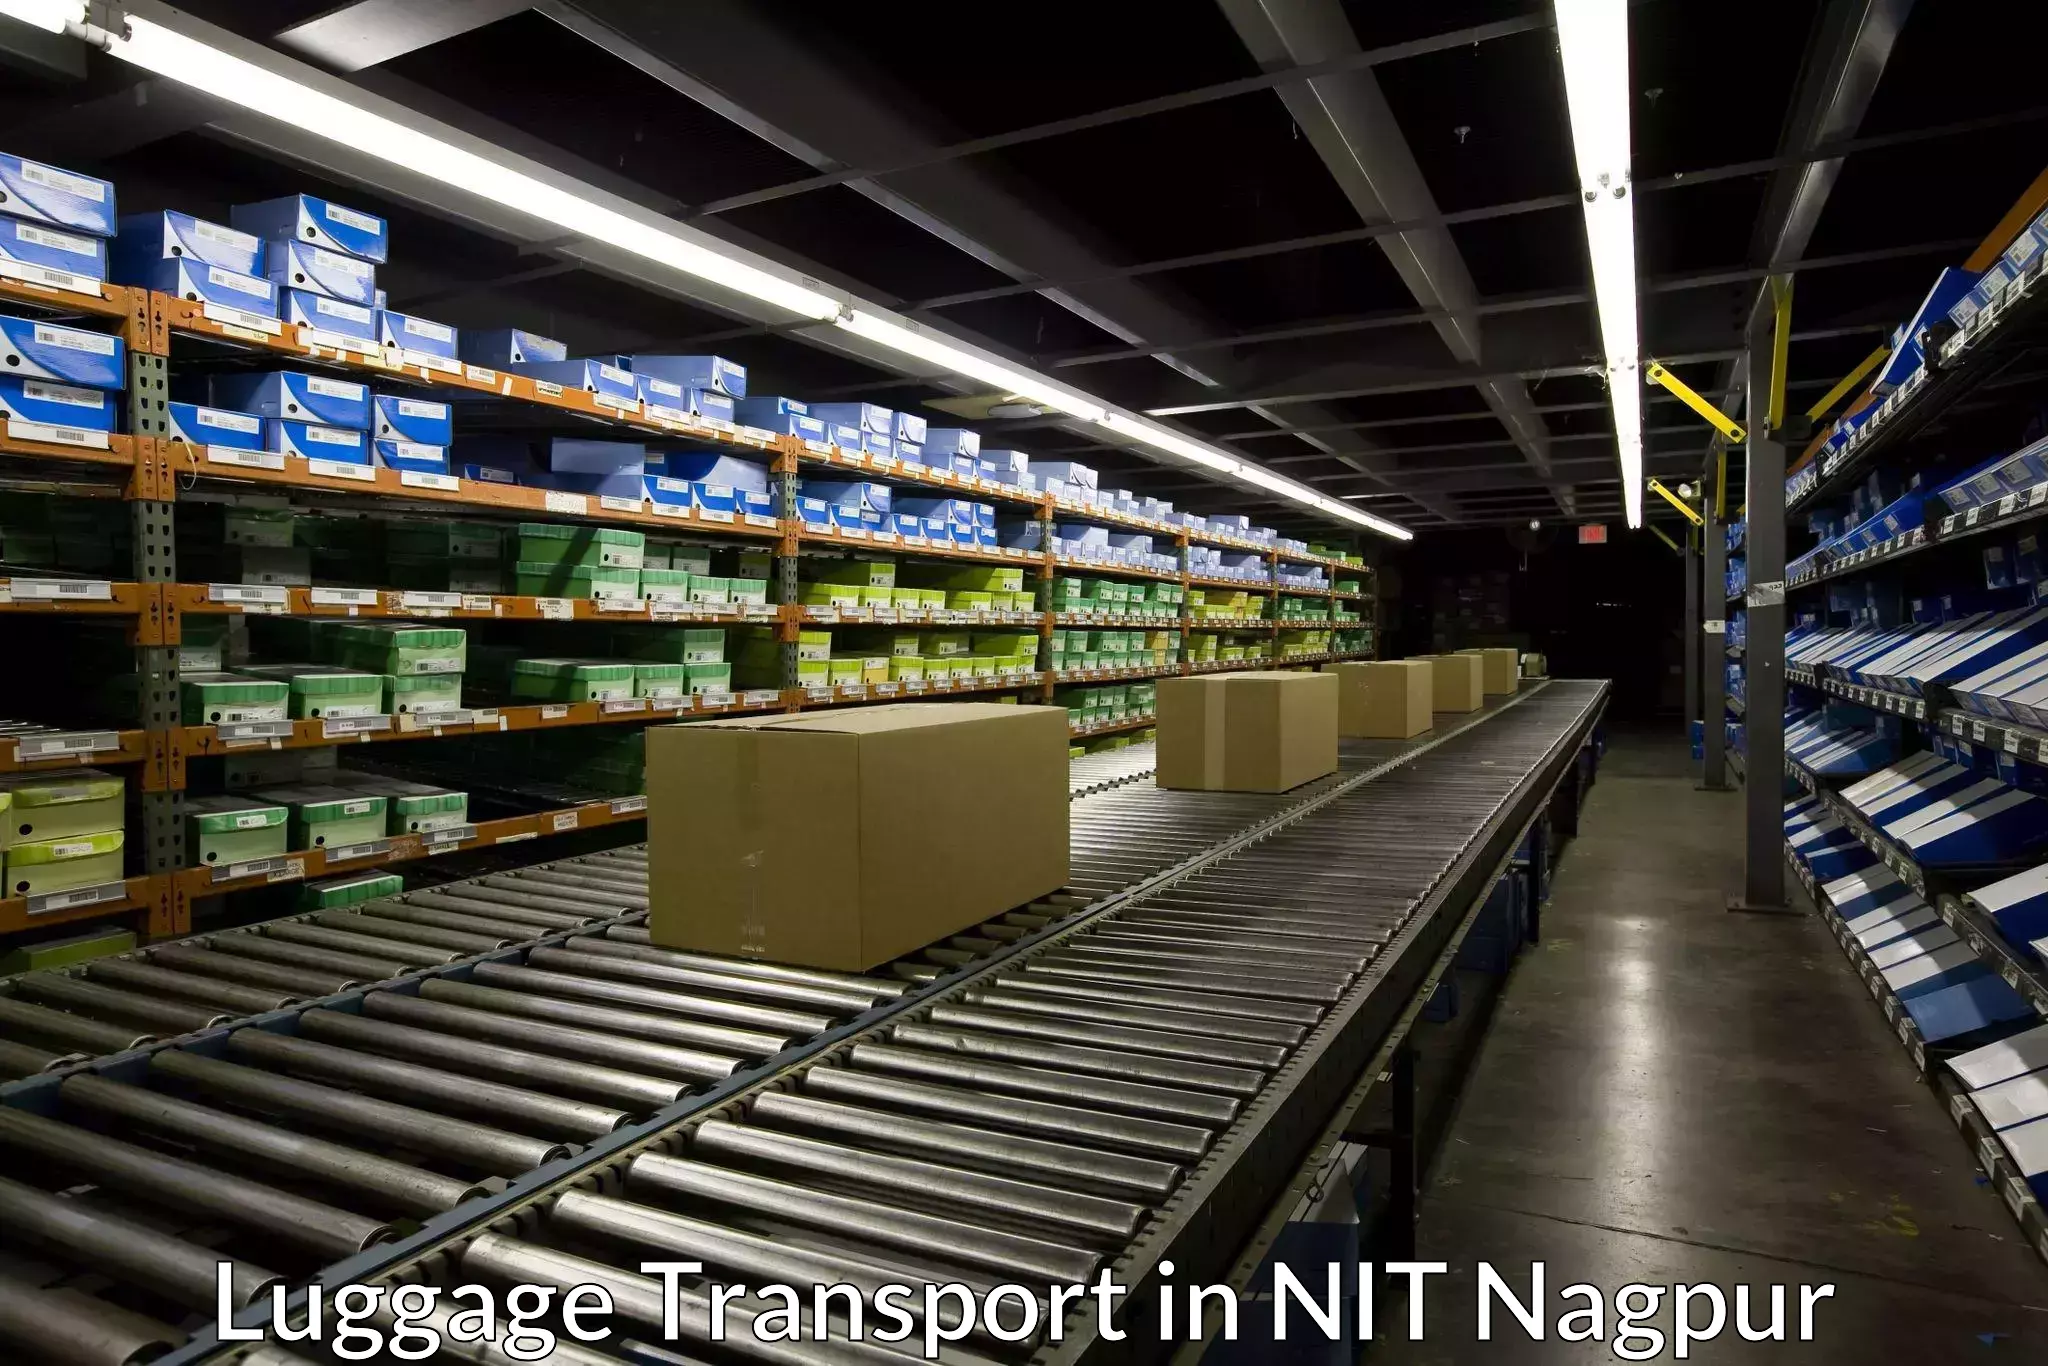 Luggage transport schedule in NIT Nagpur